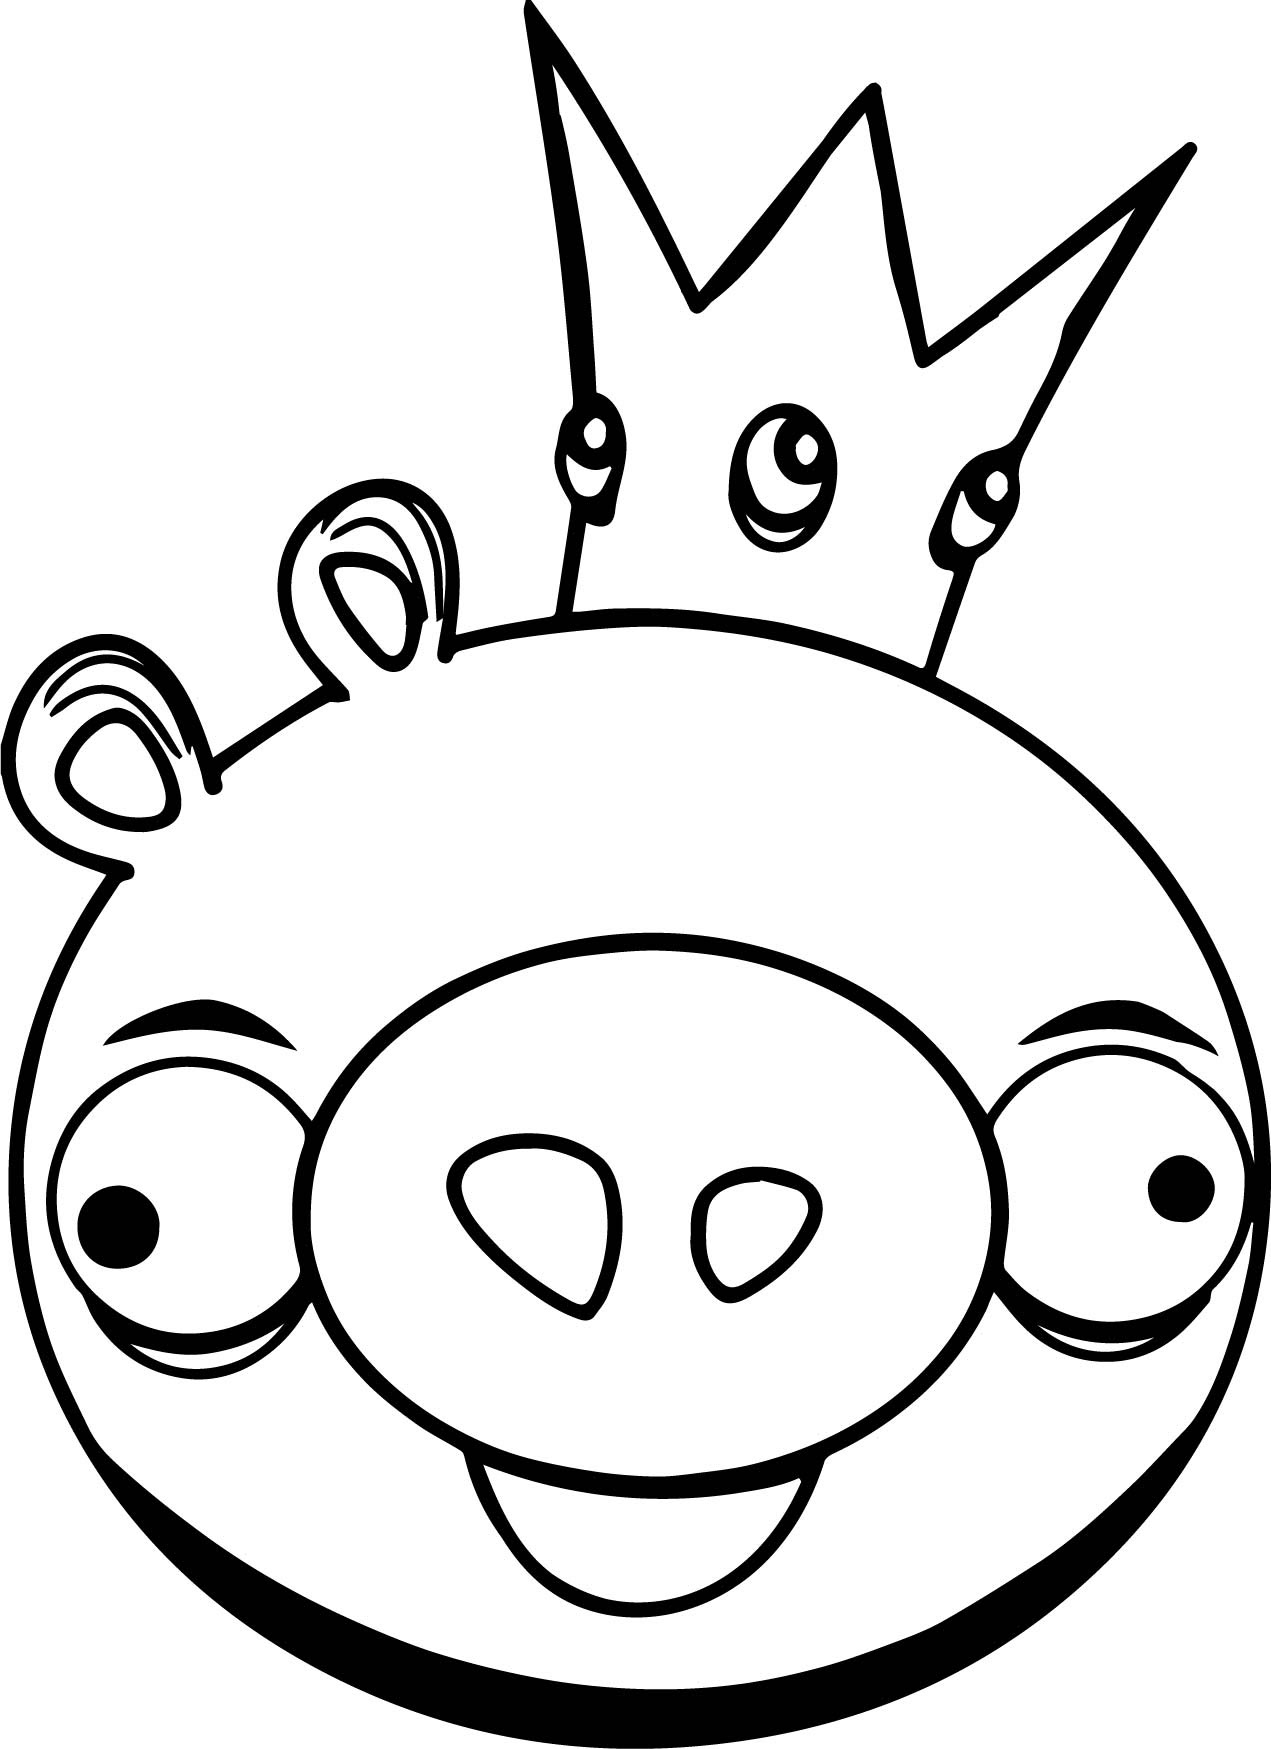 King Pig Angry Birds Coloring Page | Wecoloringpage.com